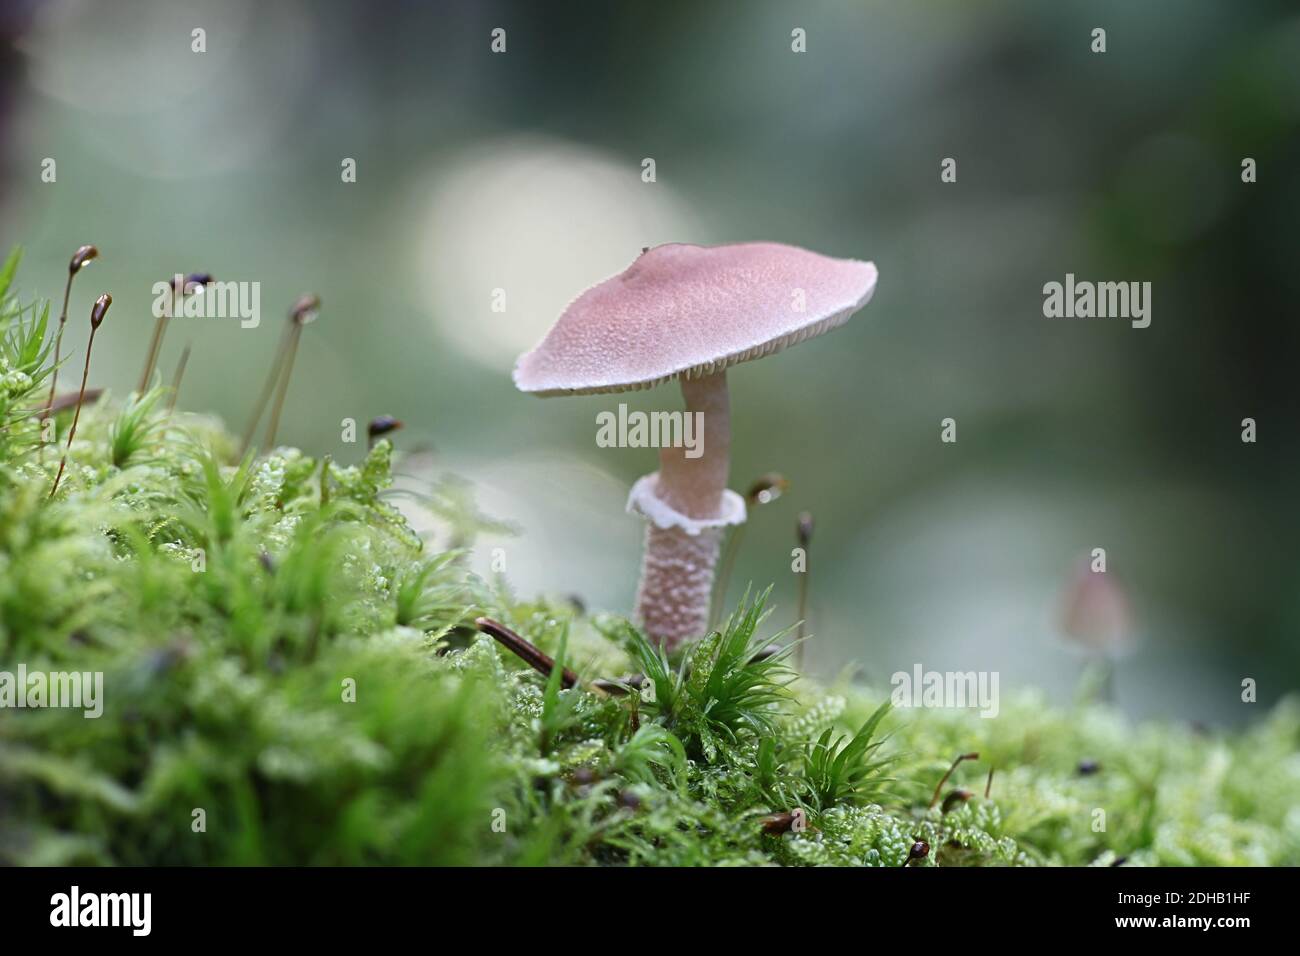 Cystoderma carcharias, known as the pearly powdercap, wild mushroom from Finland Stock Photo